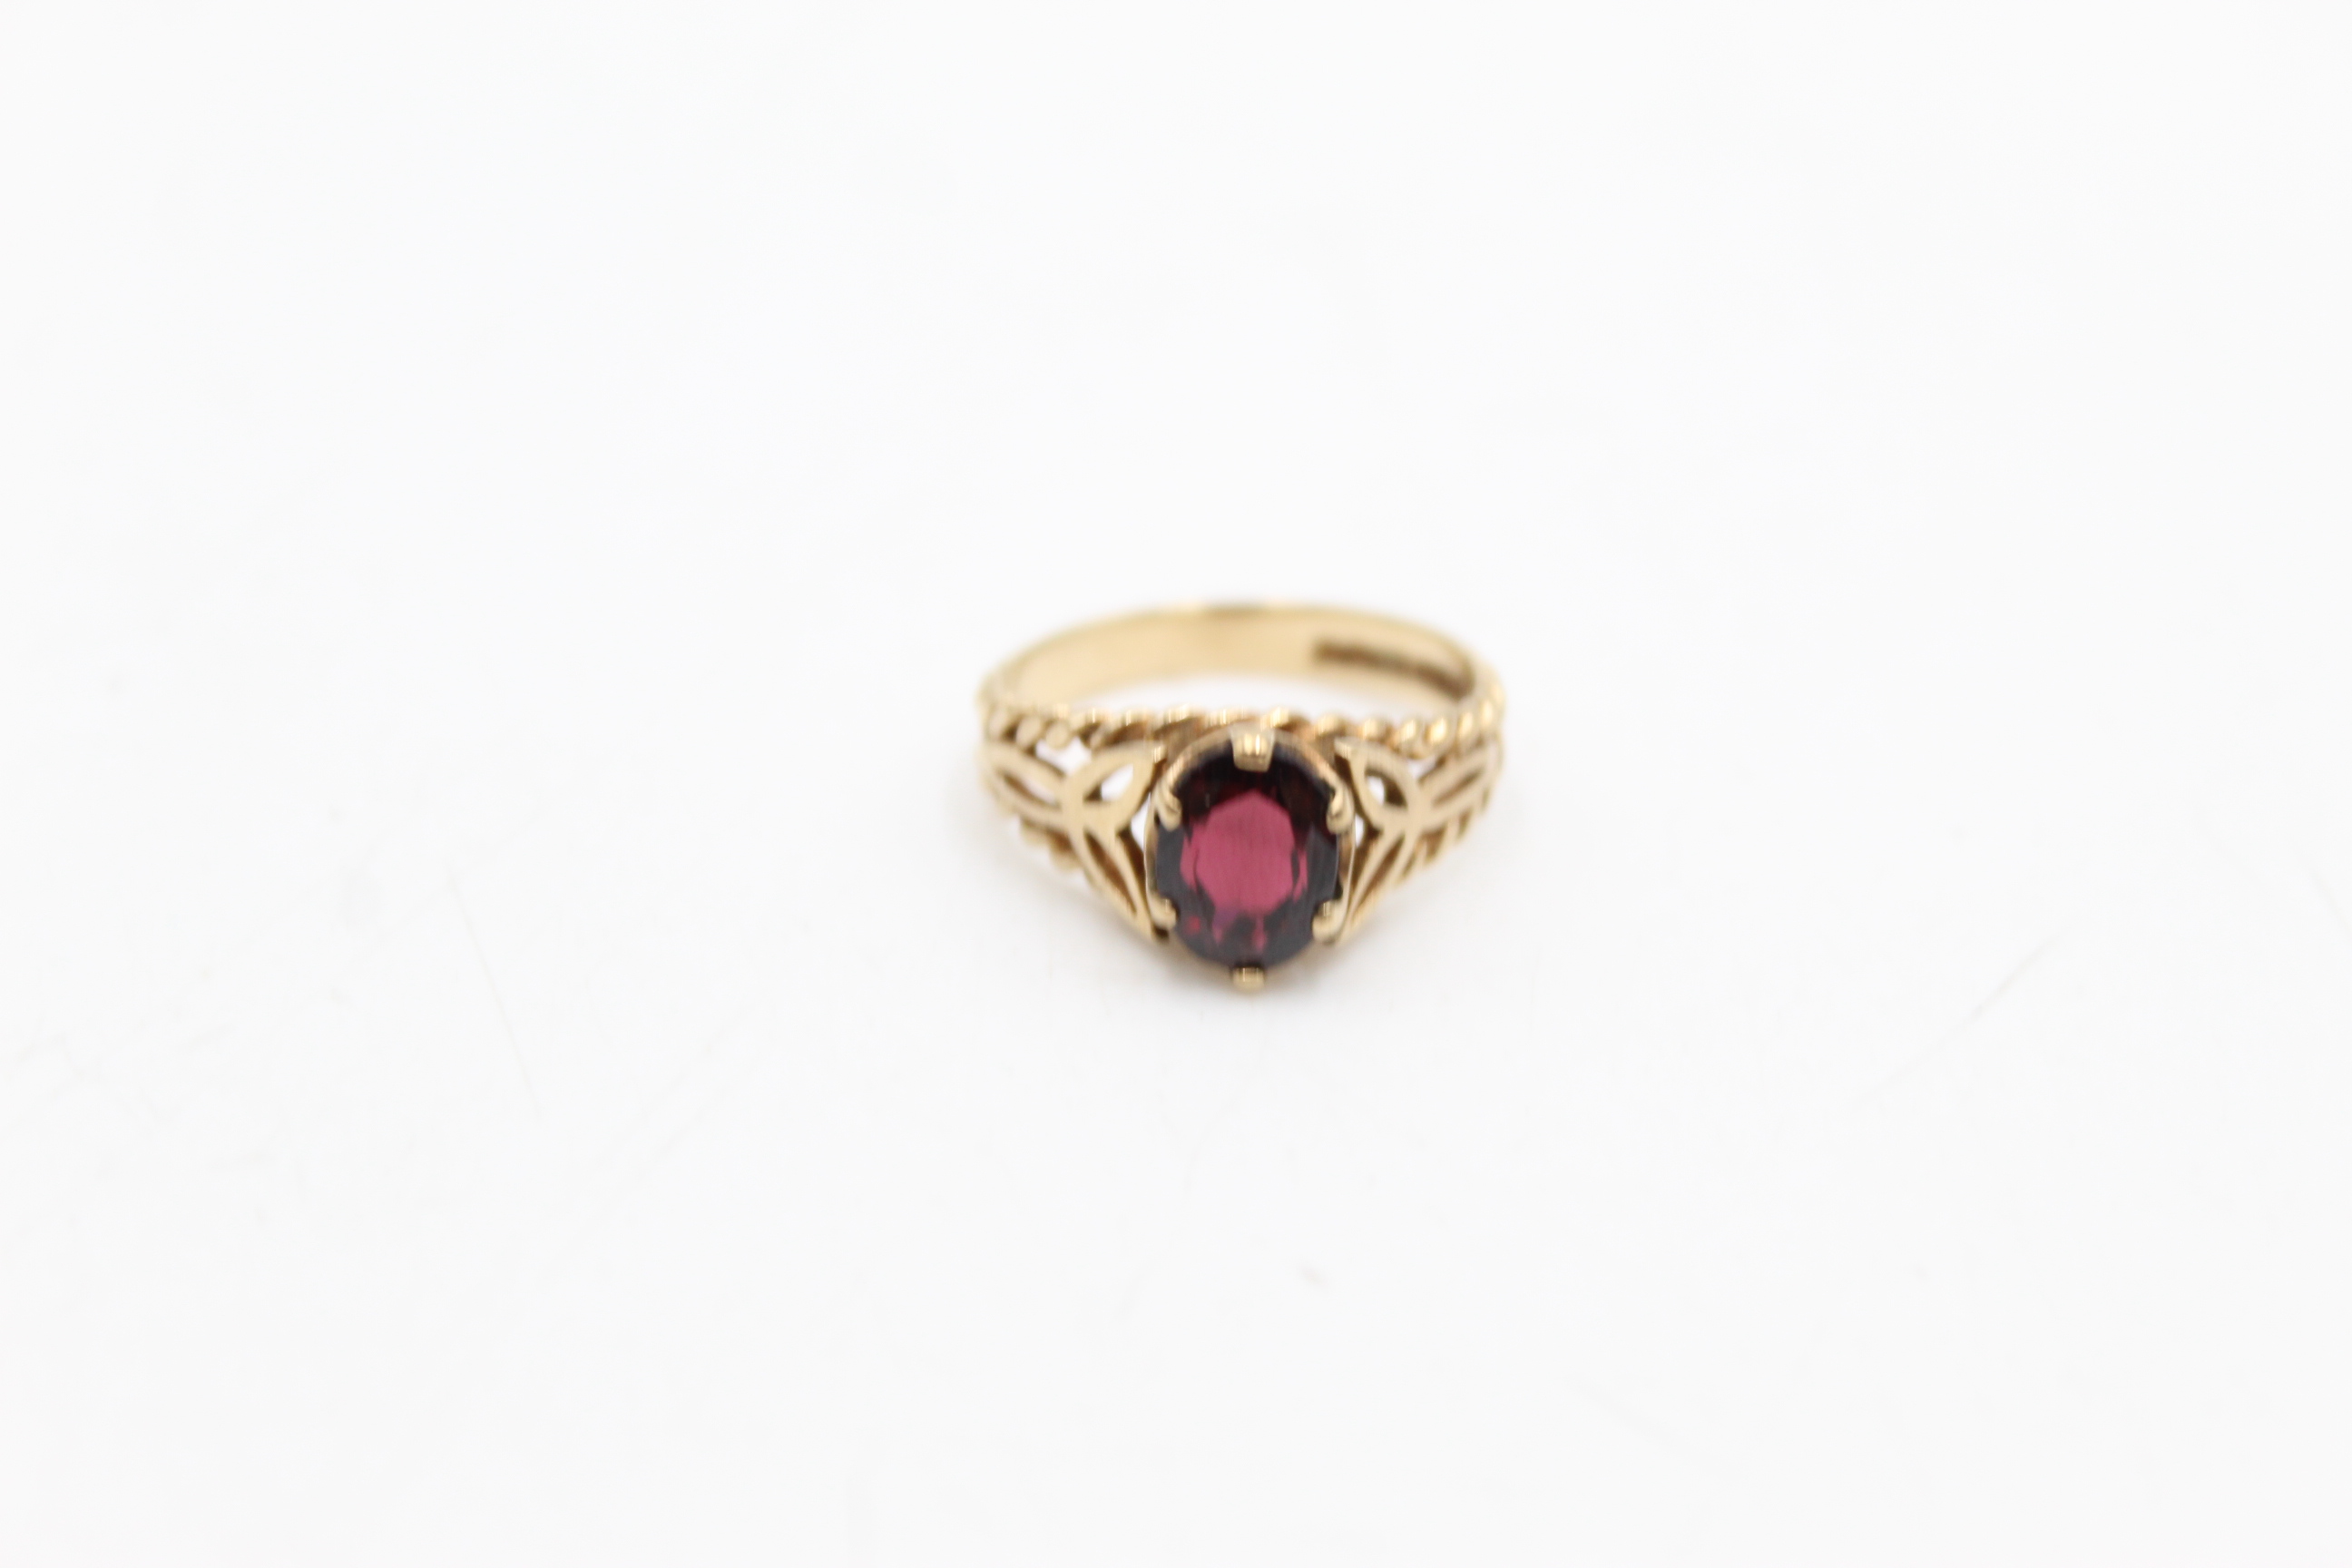 9ct gold garnet solitaire cutwork band ring (2.3g) - Image 2 of 6